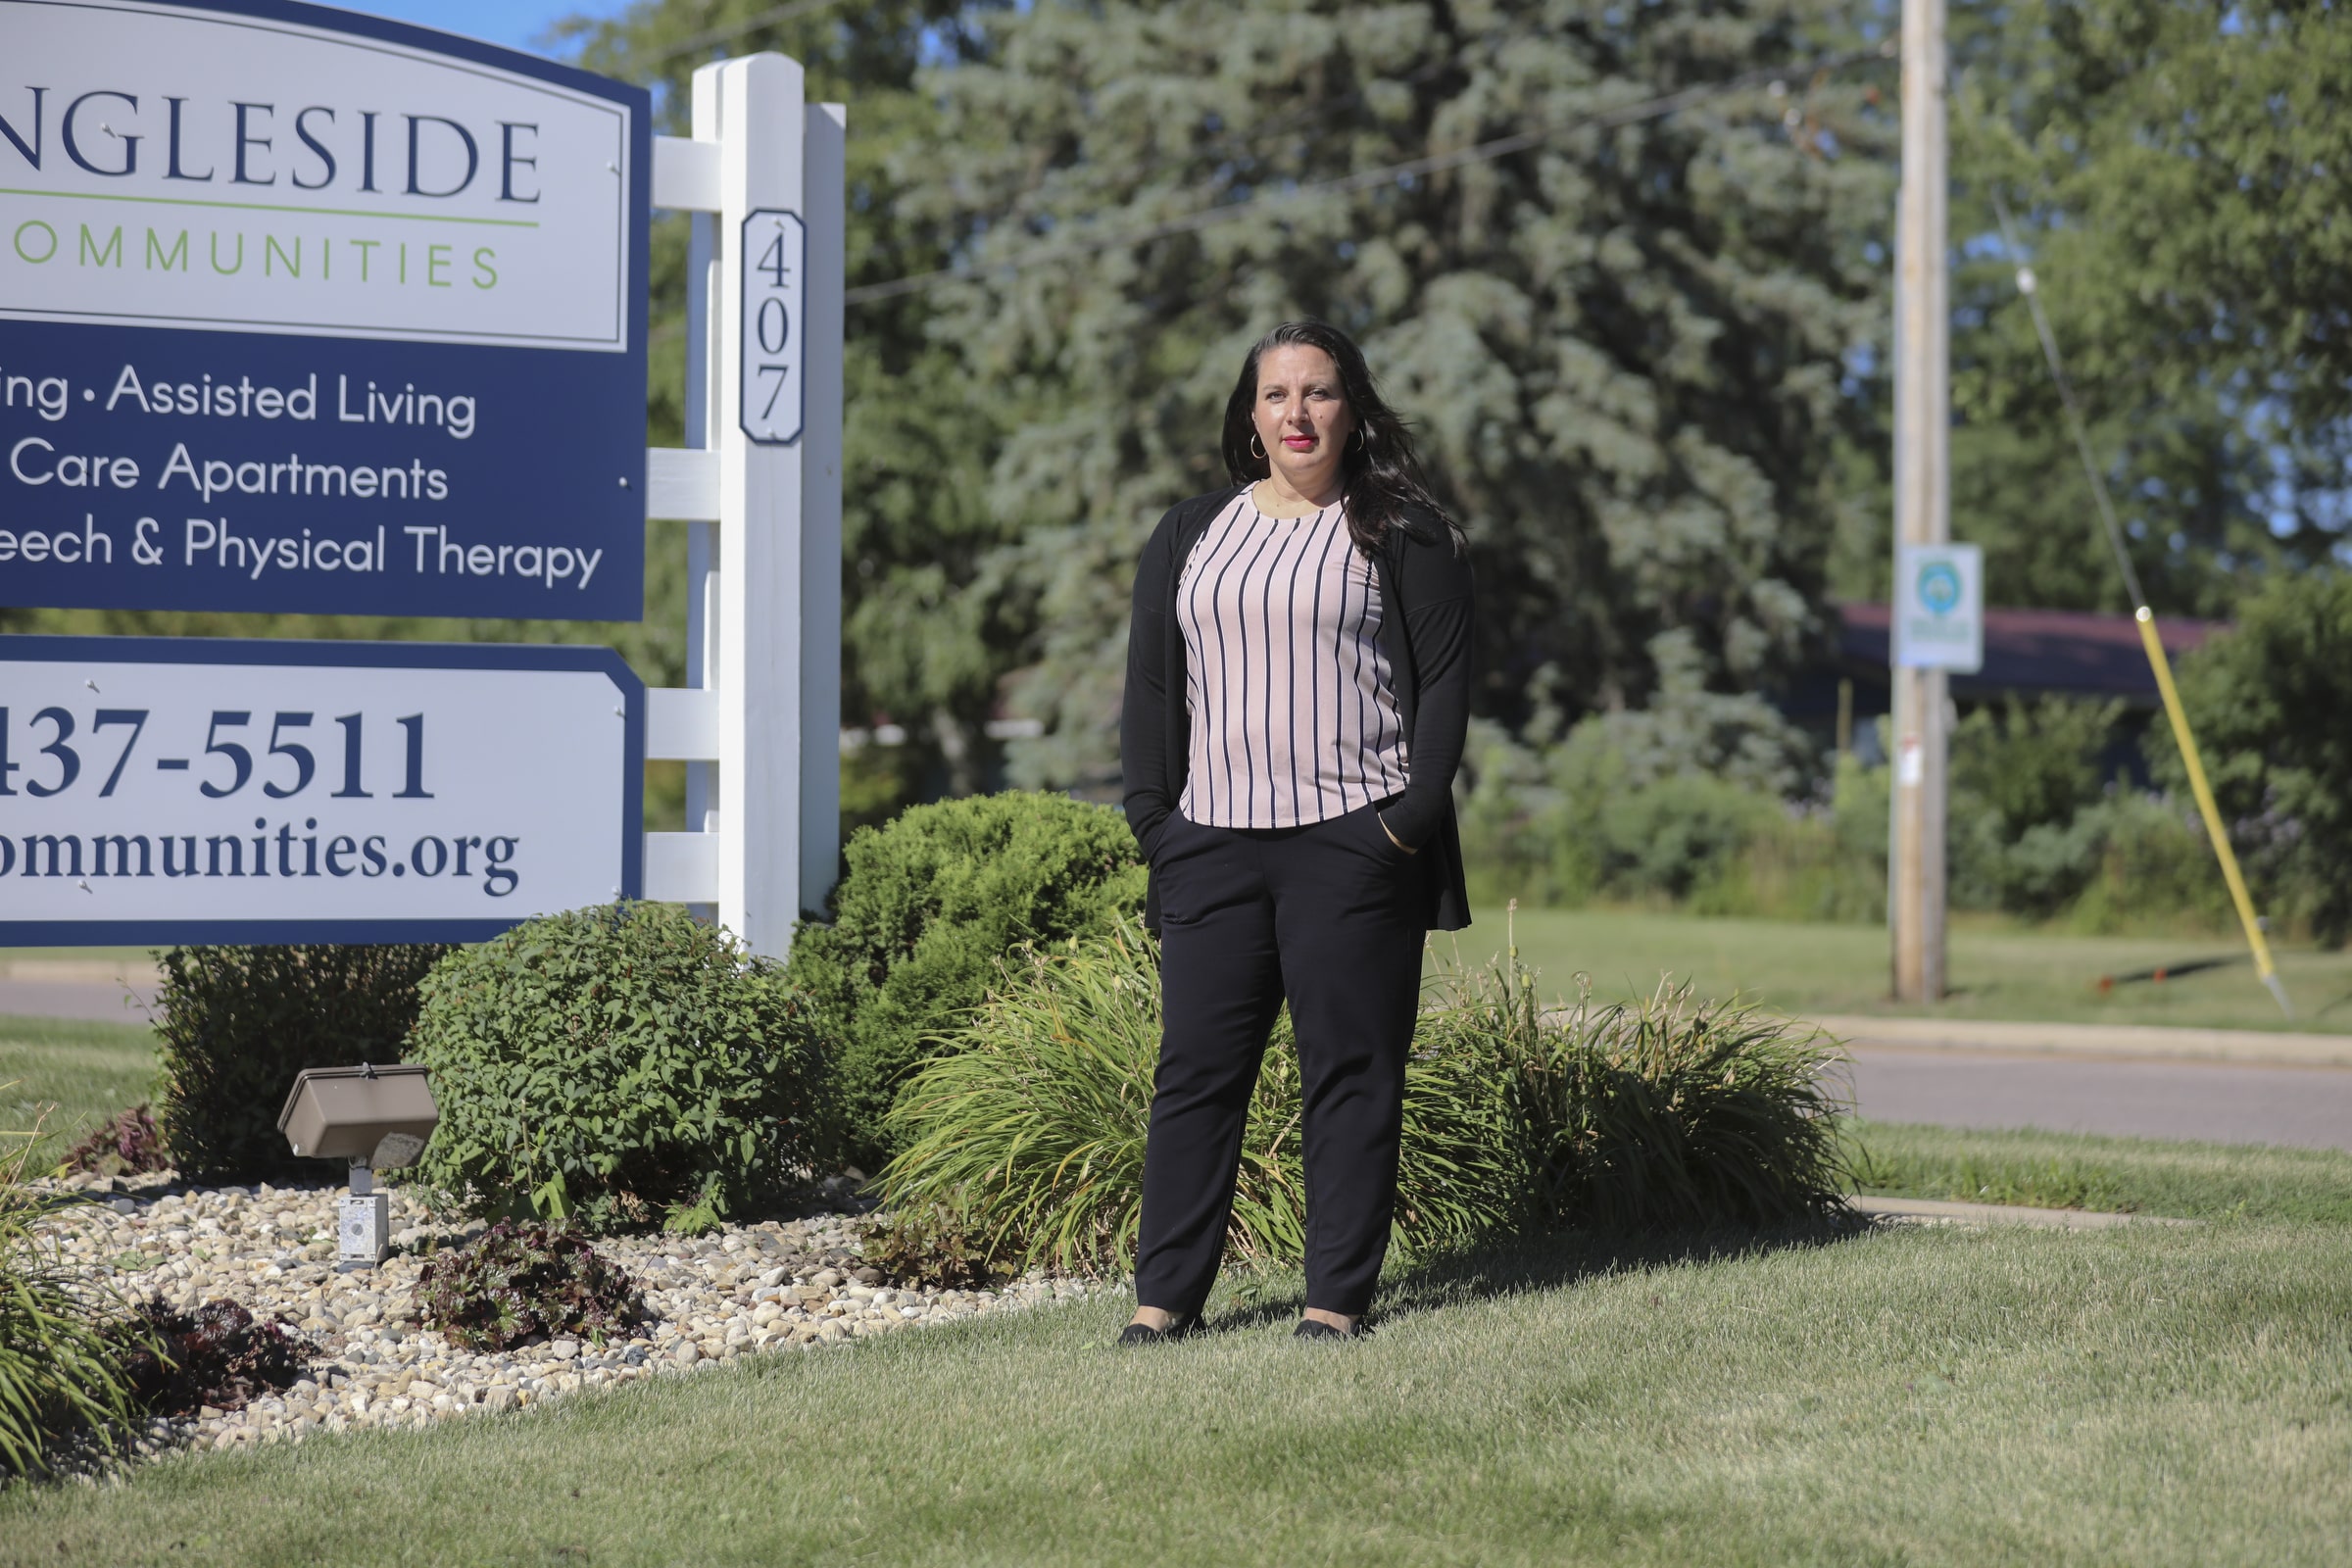 Danielle Sigler poses in front of the sign of Ingleside Communities in Mount Horeb, Wis., where she works